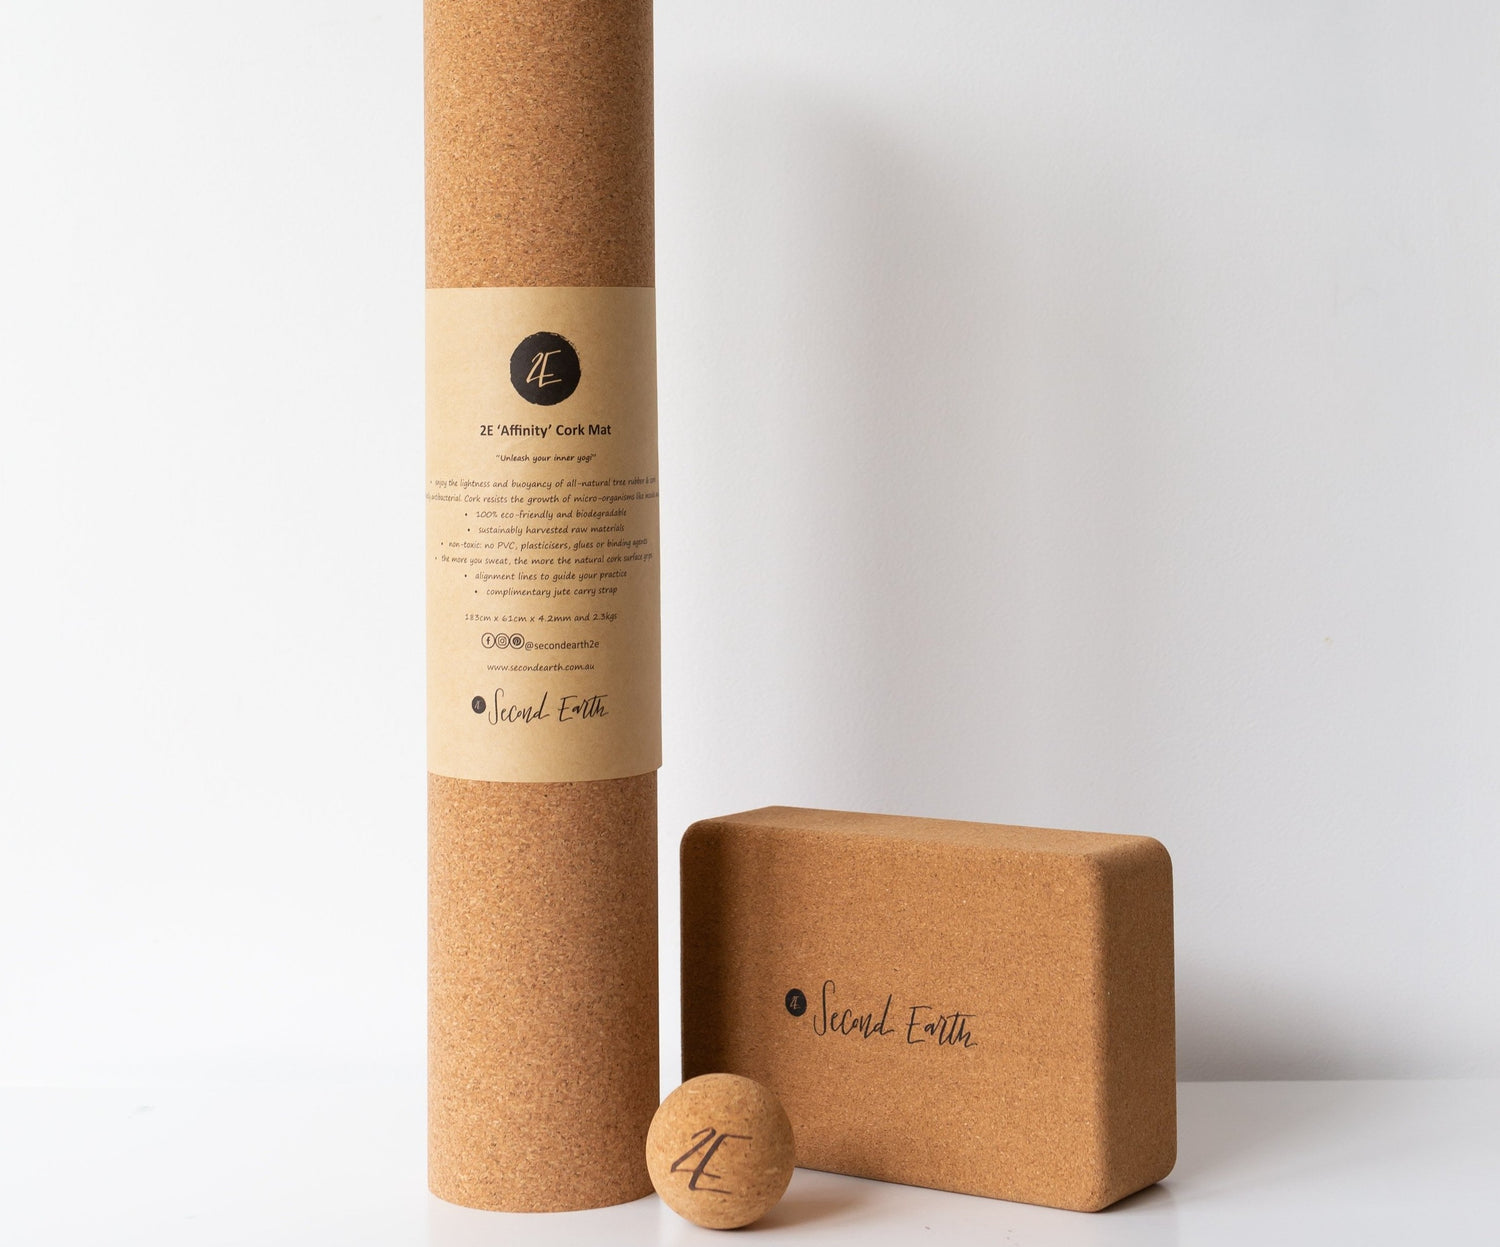 Best cork yoga mat – Second Earth 2E Affinity - Natural and sustainable cork yoga mats